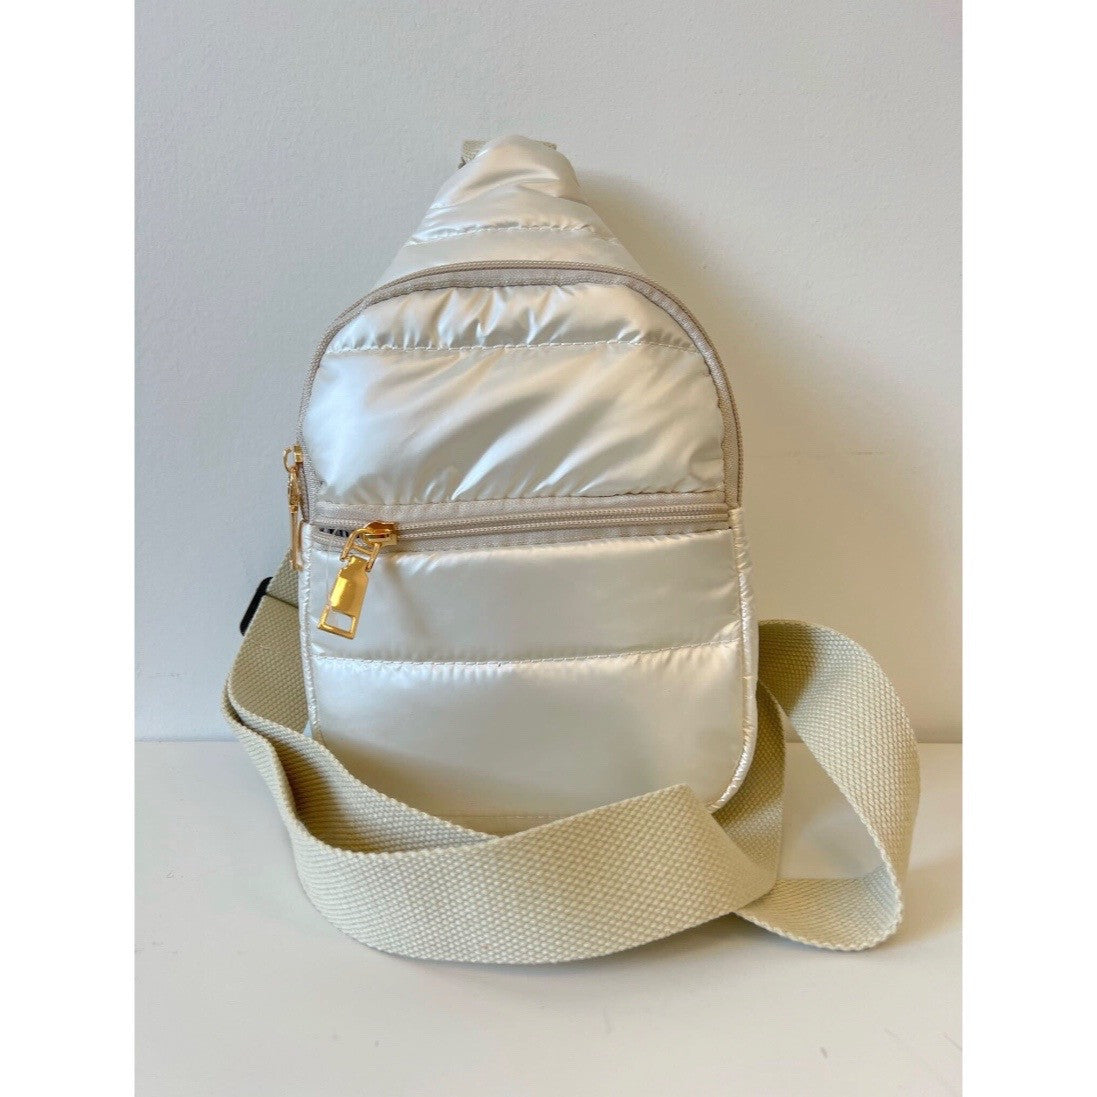 Puff Sling Bag in Ivory